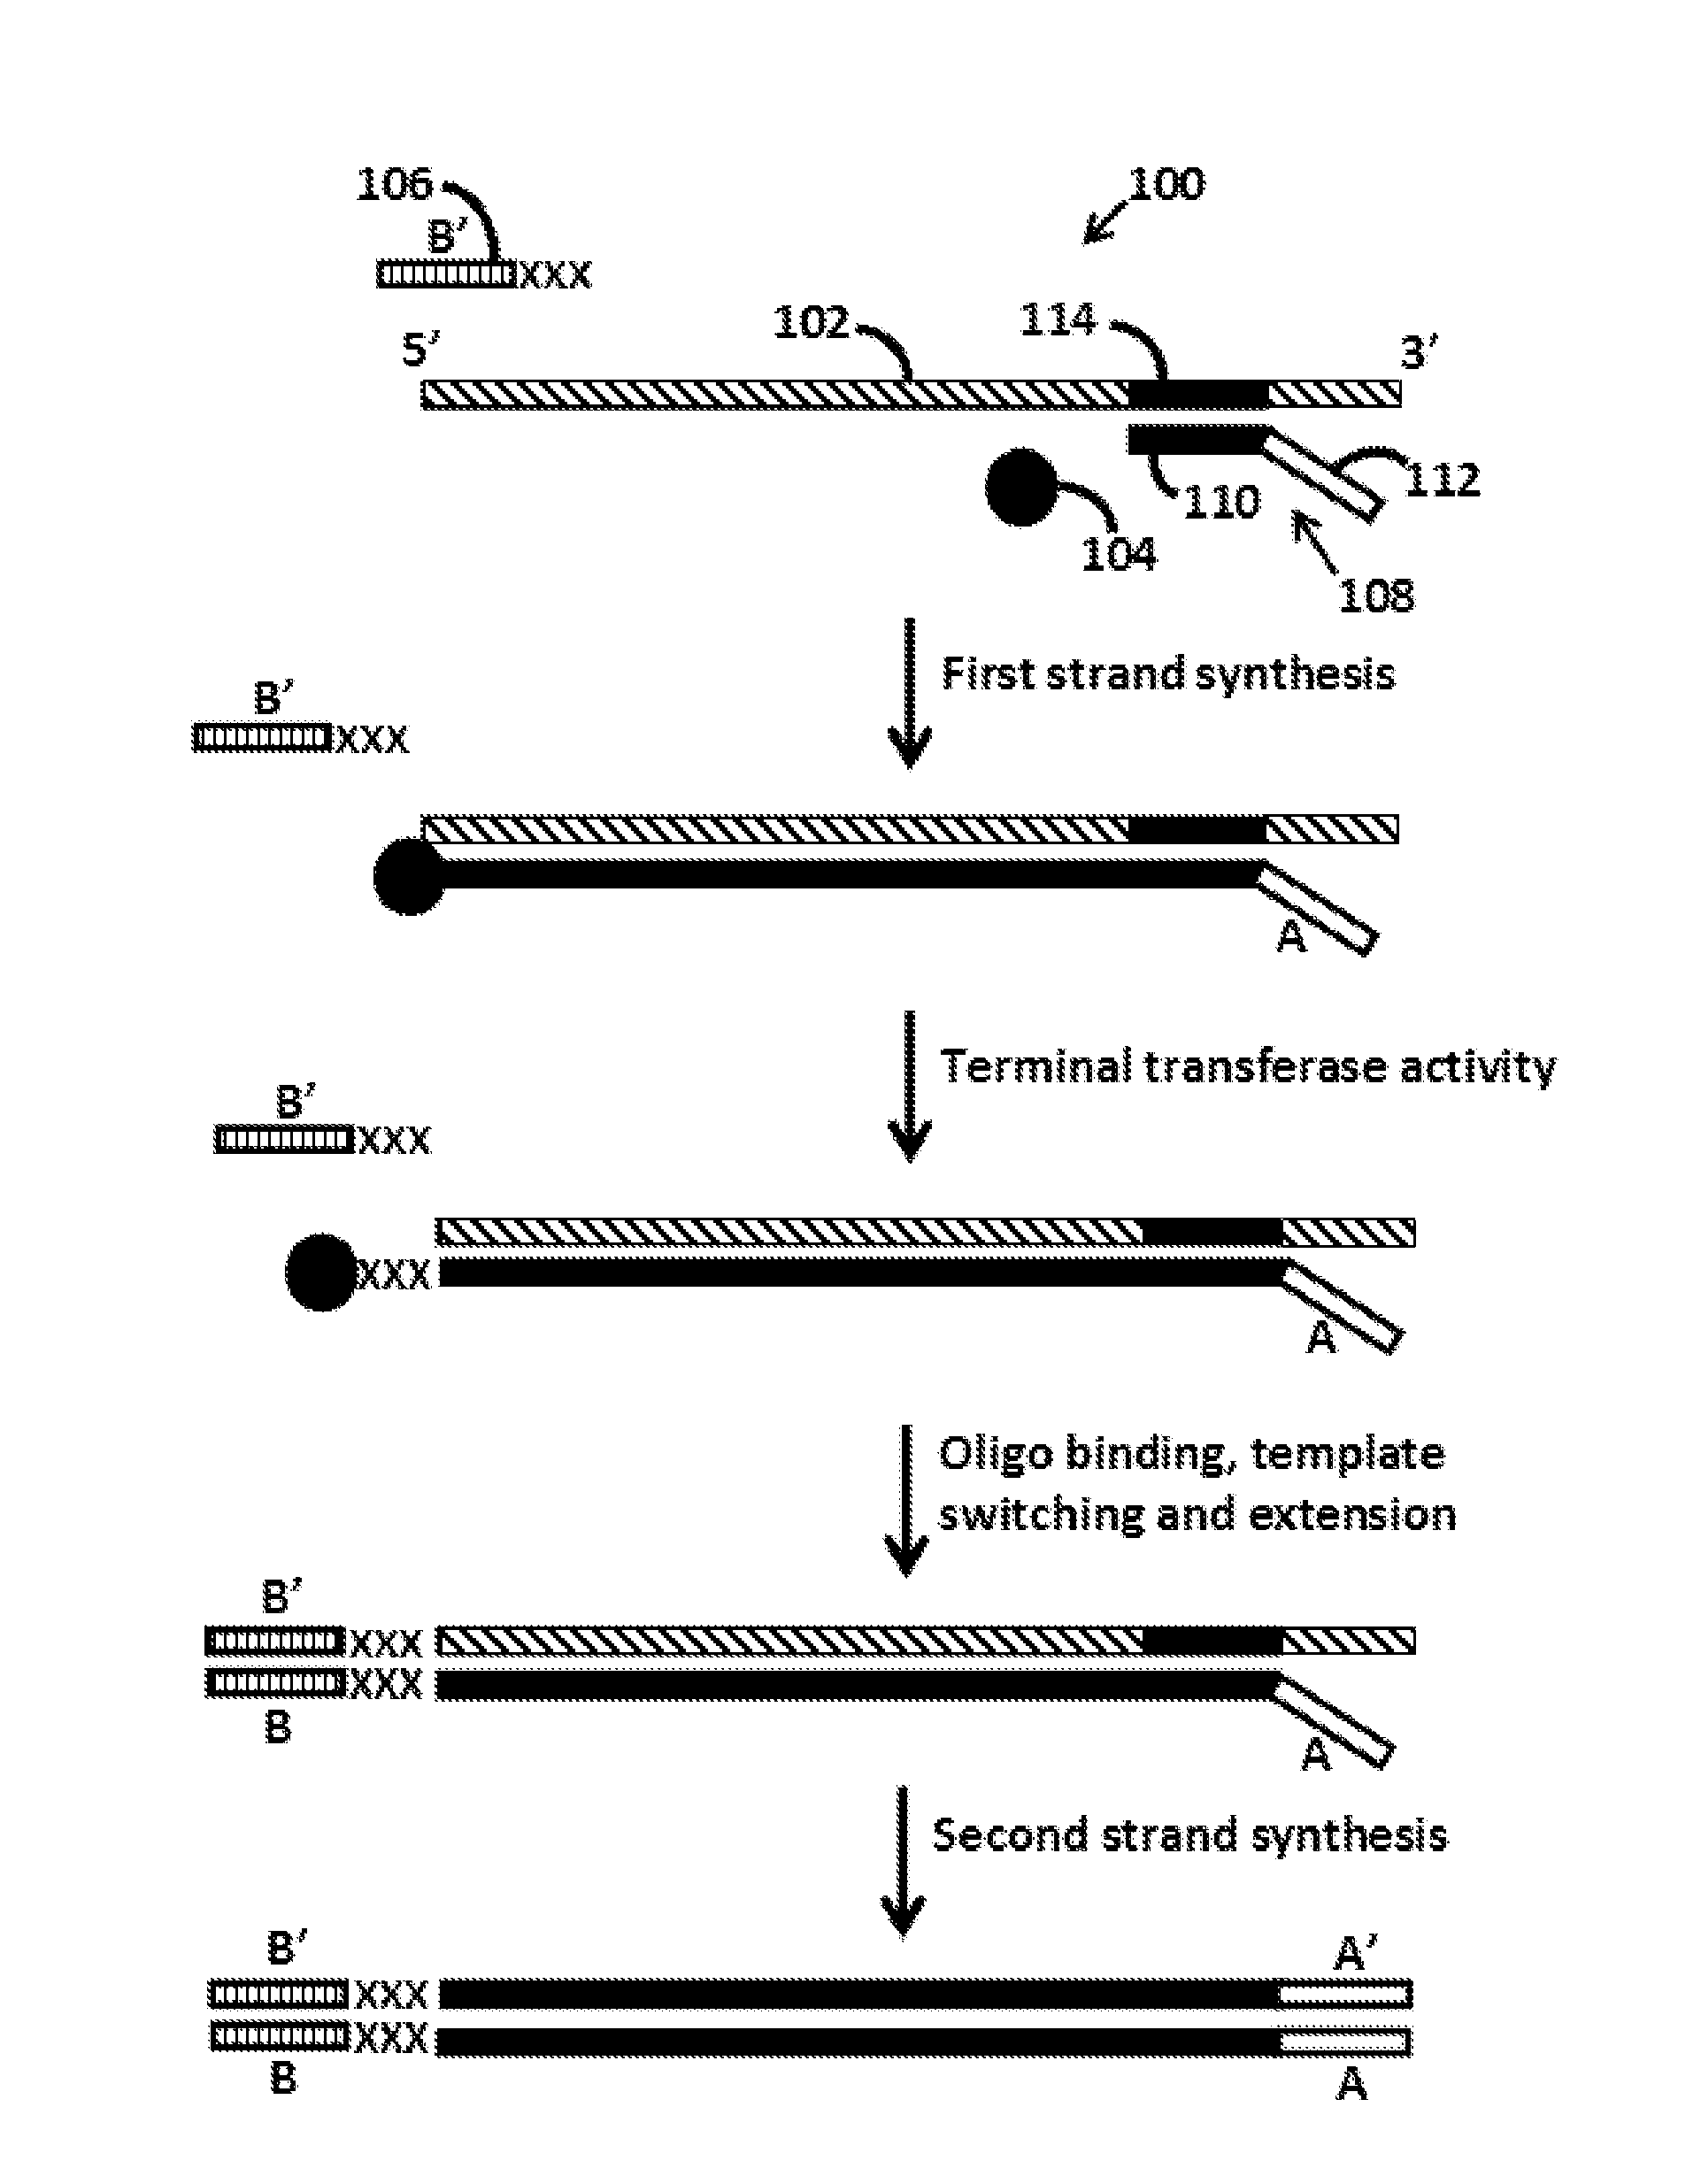 Template switch-based methods for producing a product nucleic acid